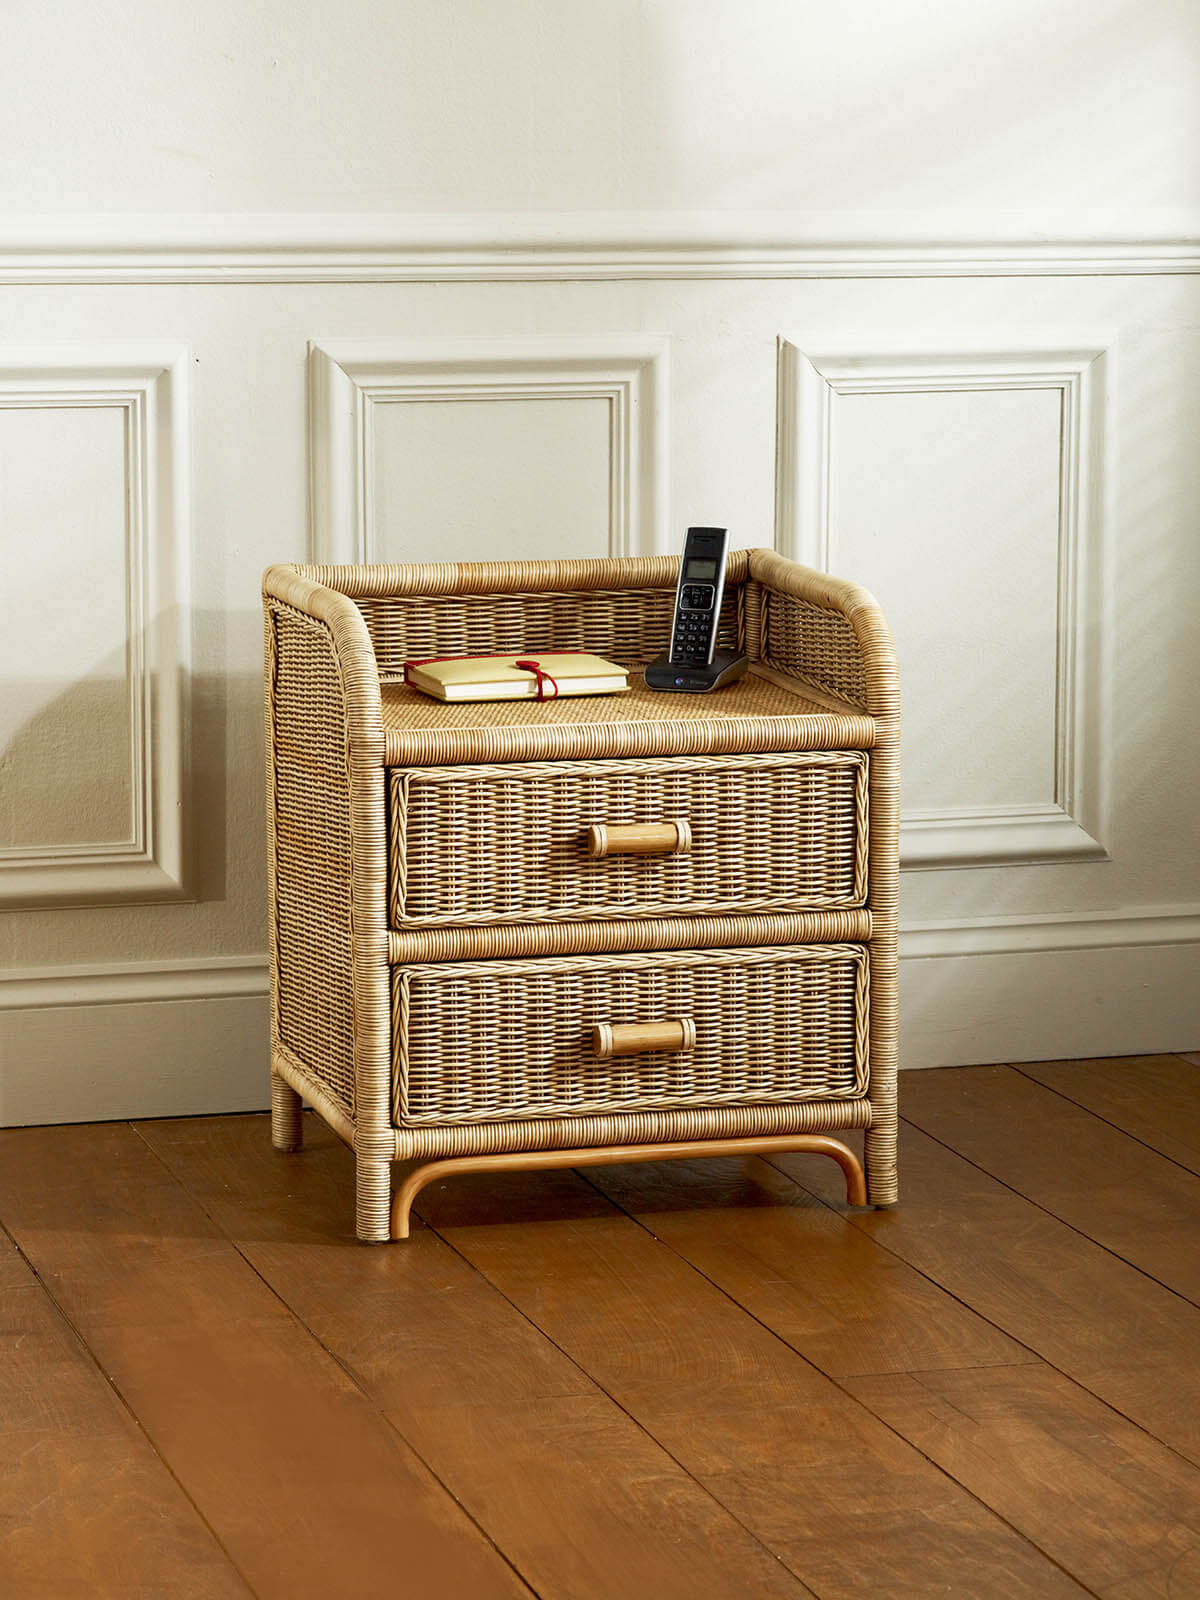 Showing image for Cane chest - 2 drawer